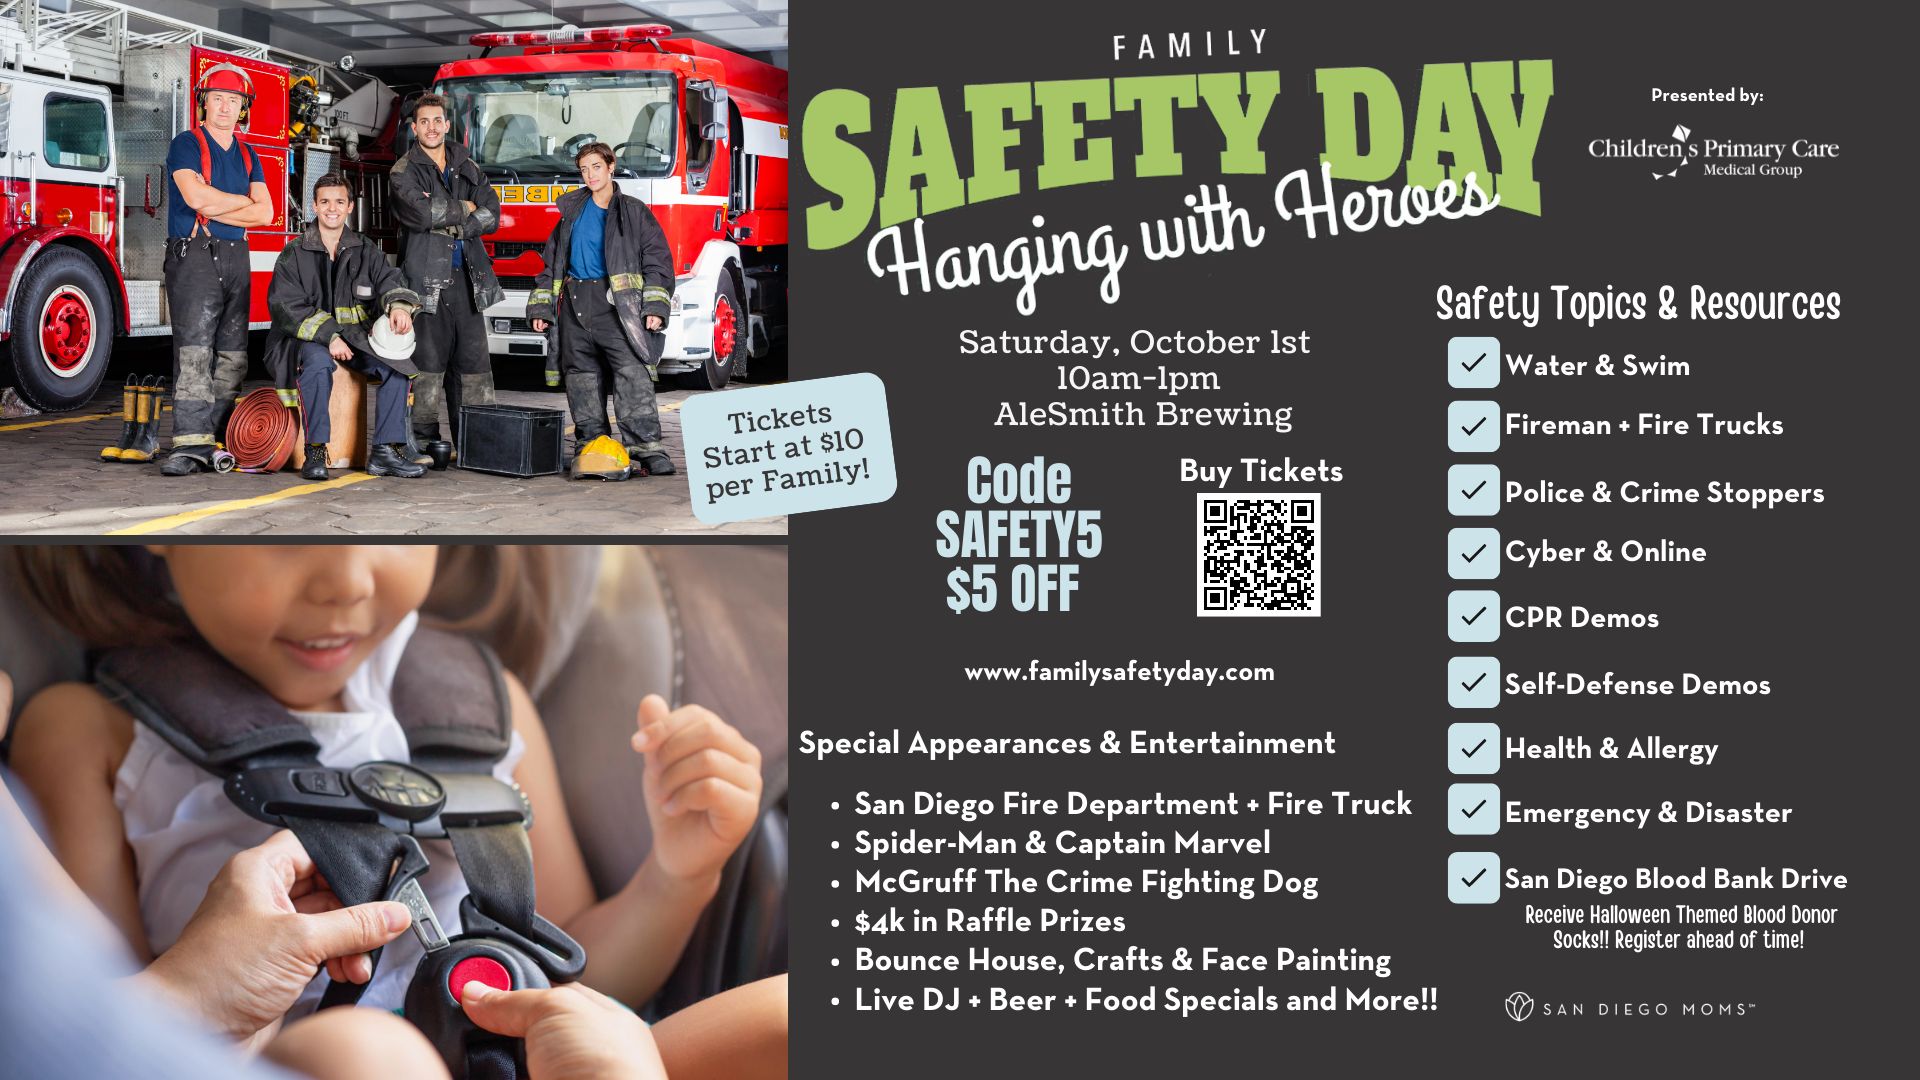 Family Safety Day, Saturday, October 1, 2022 from 10am-1pm at AleSmith Brewing, San Diego, California, United States